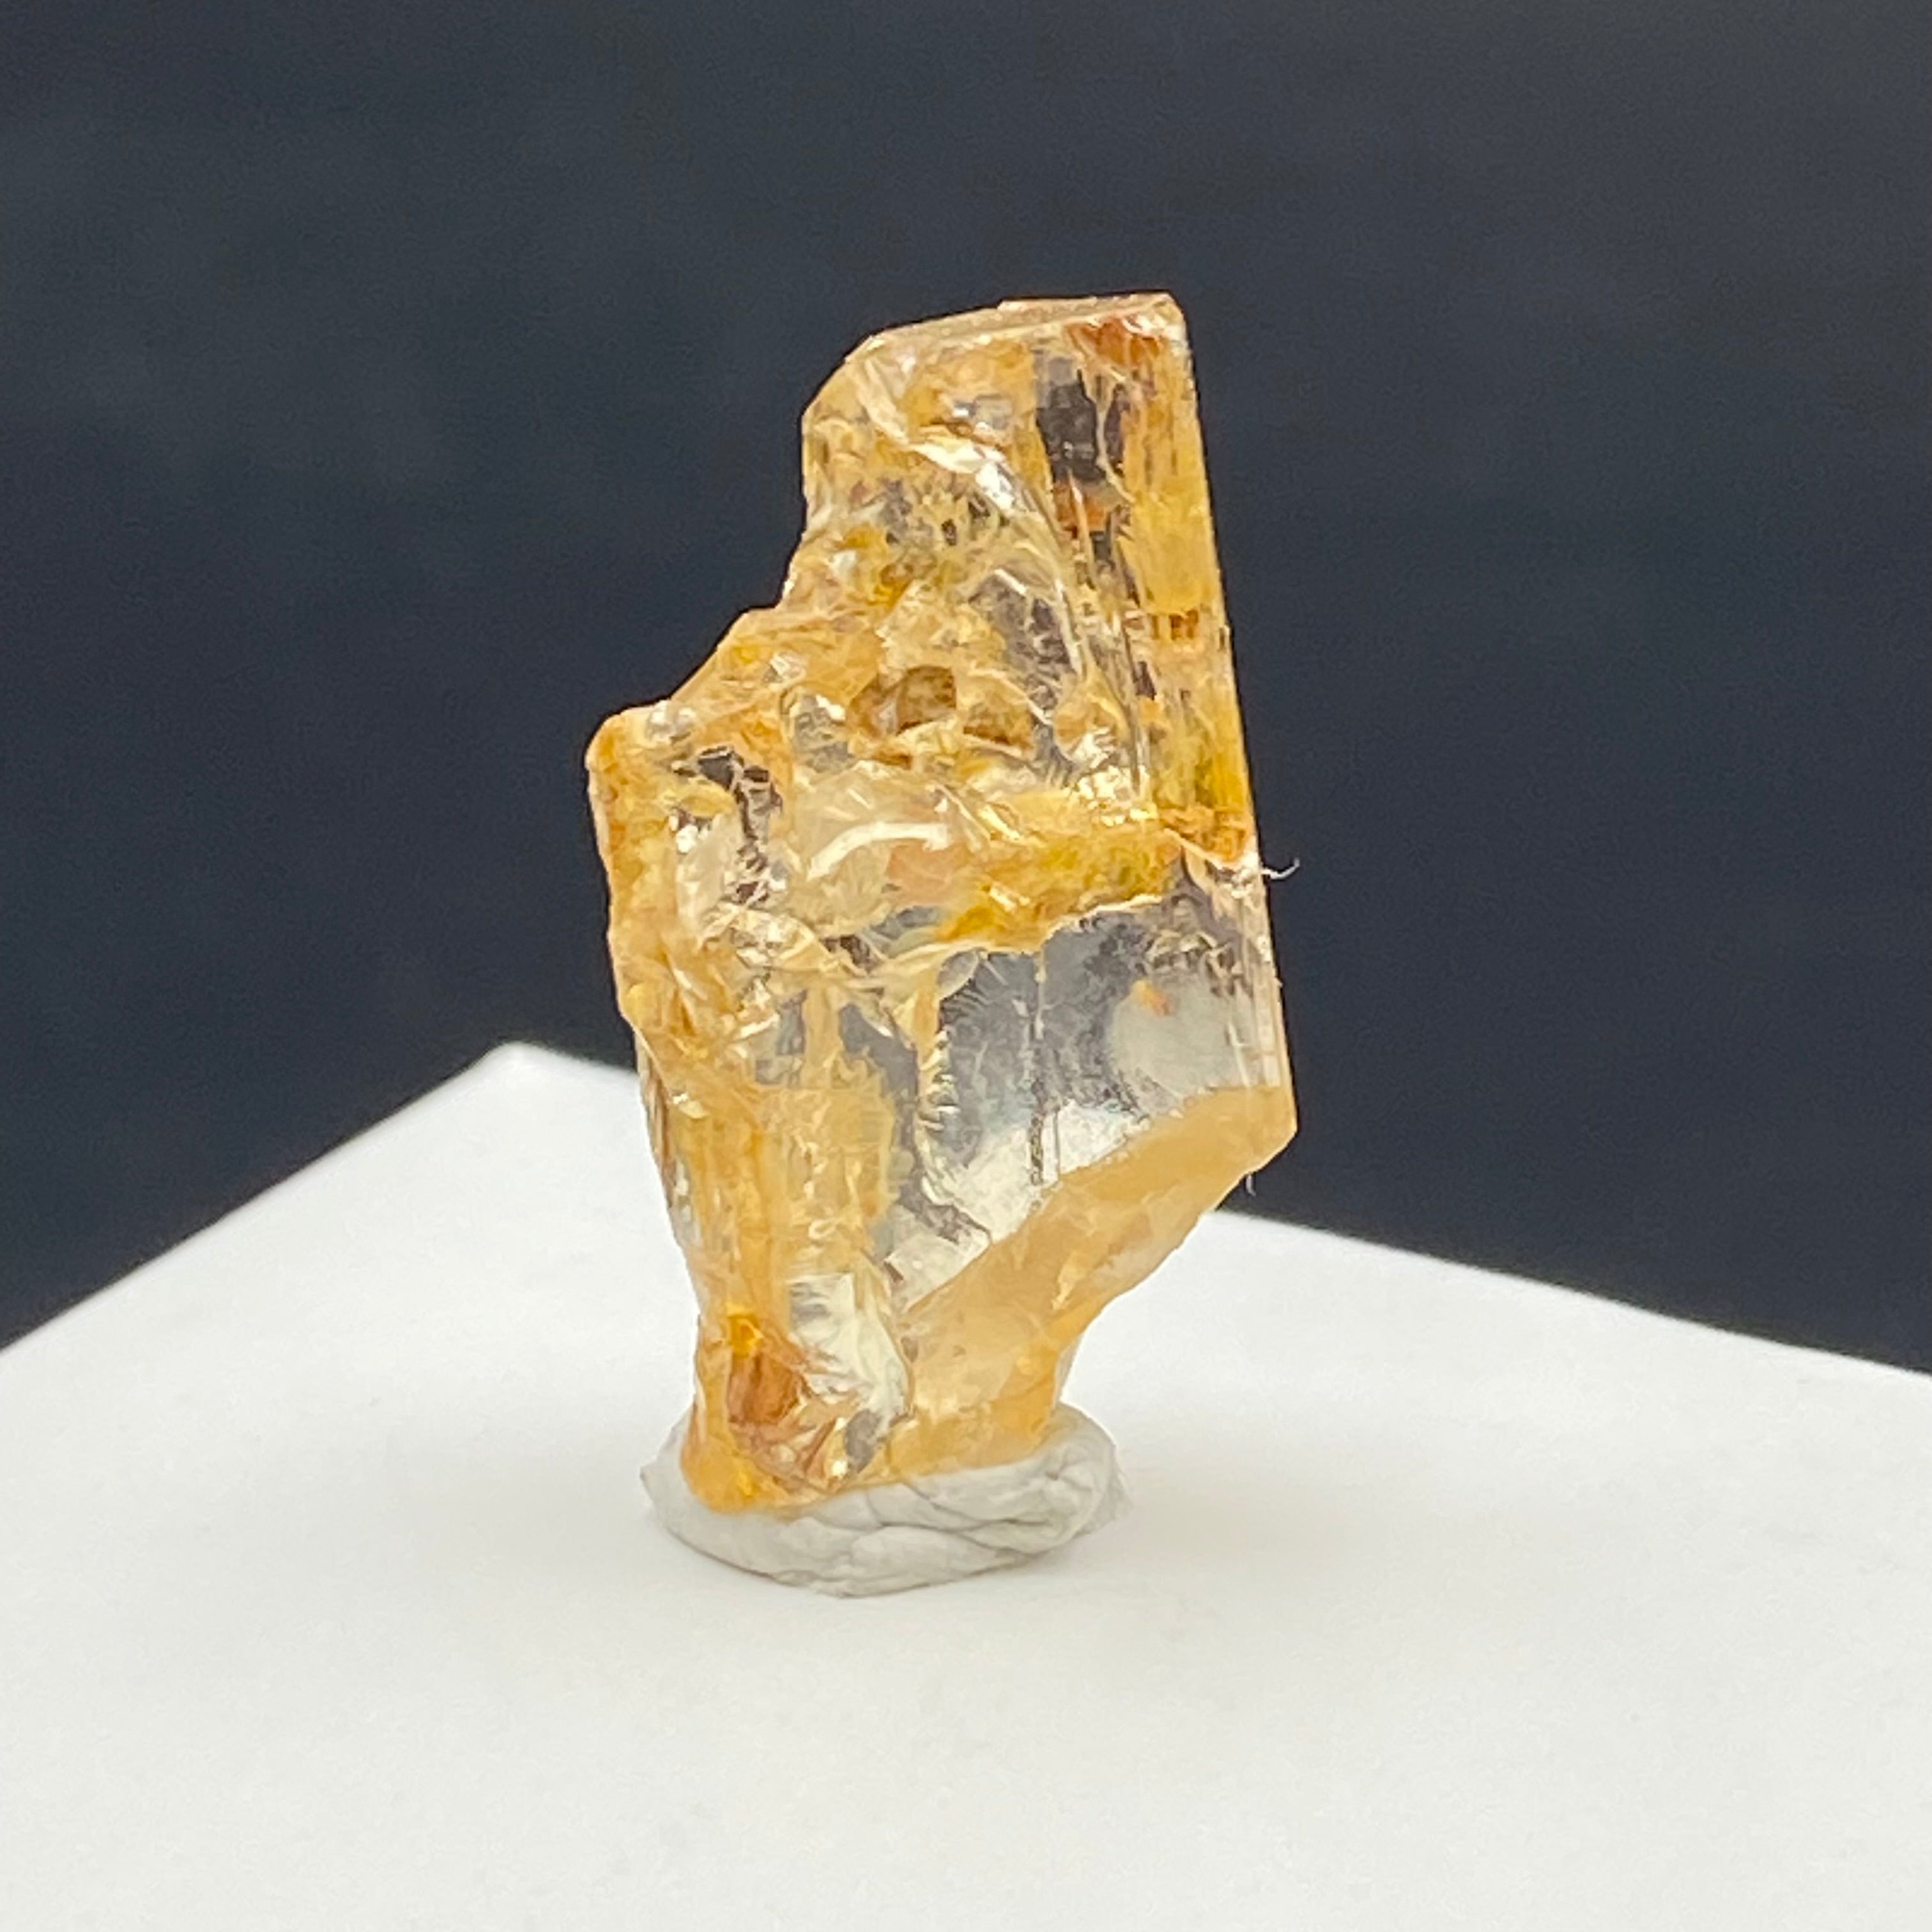 Imperial Topaz Non-Terminated Crystal - 110